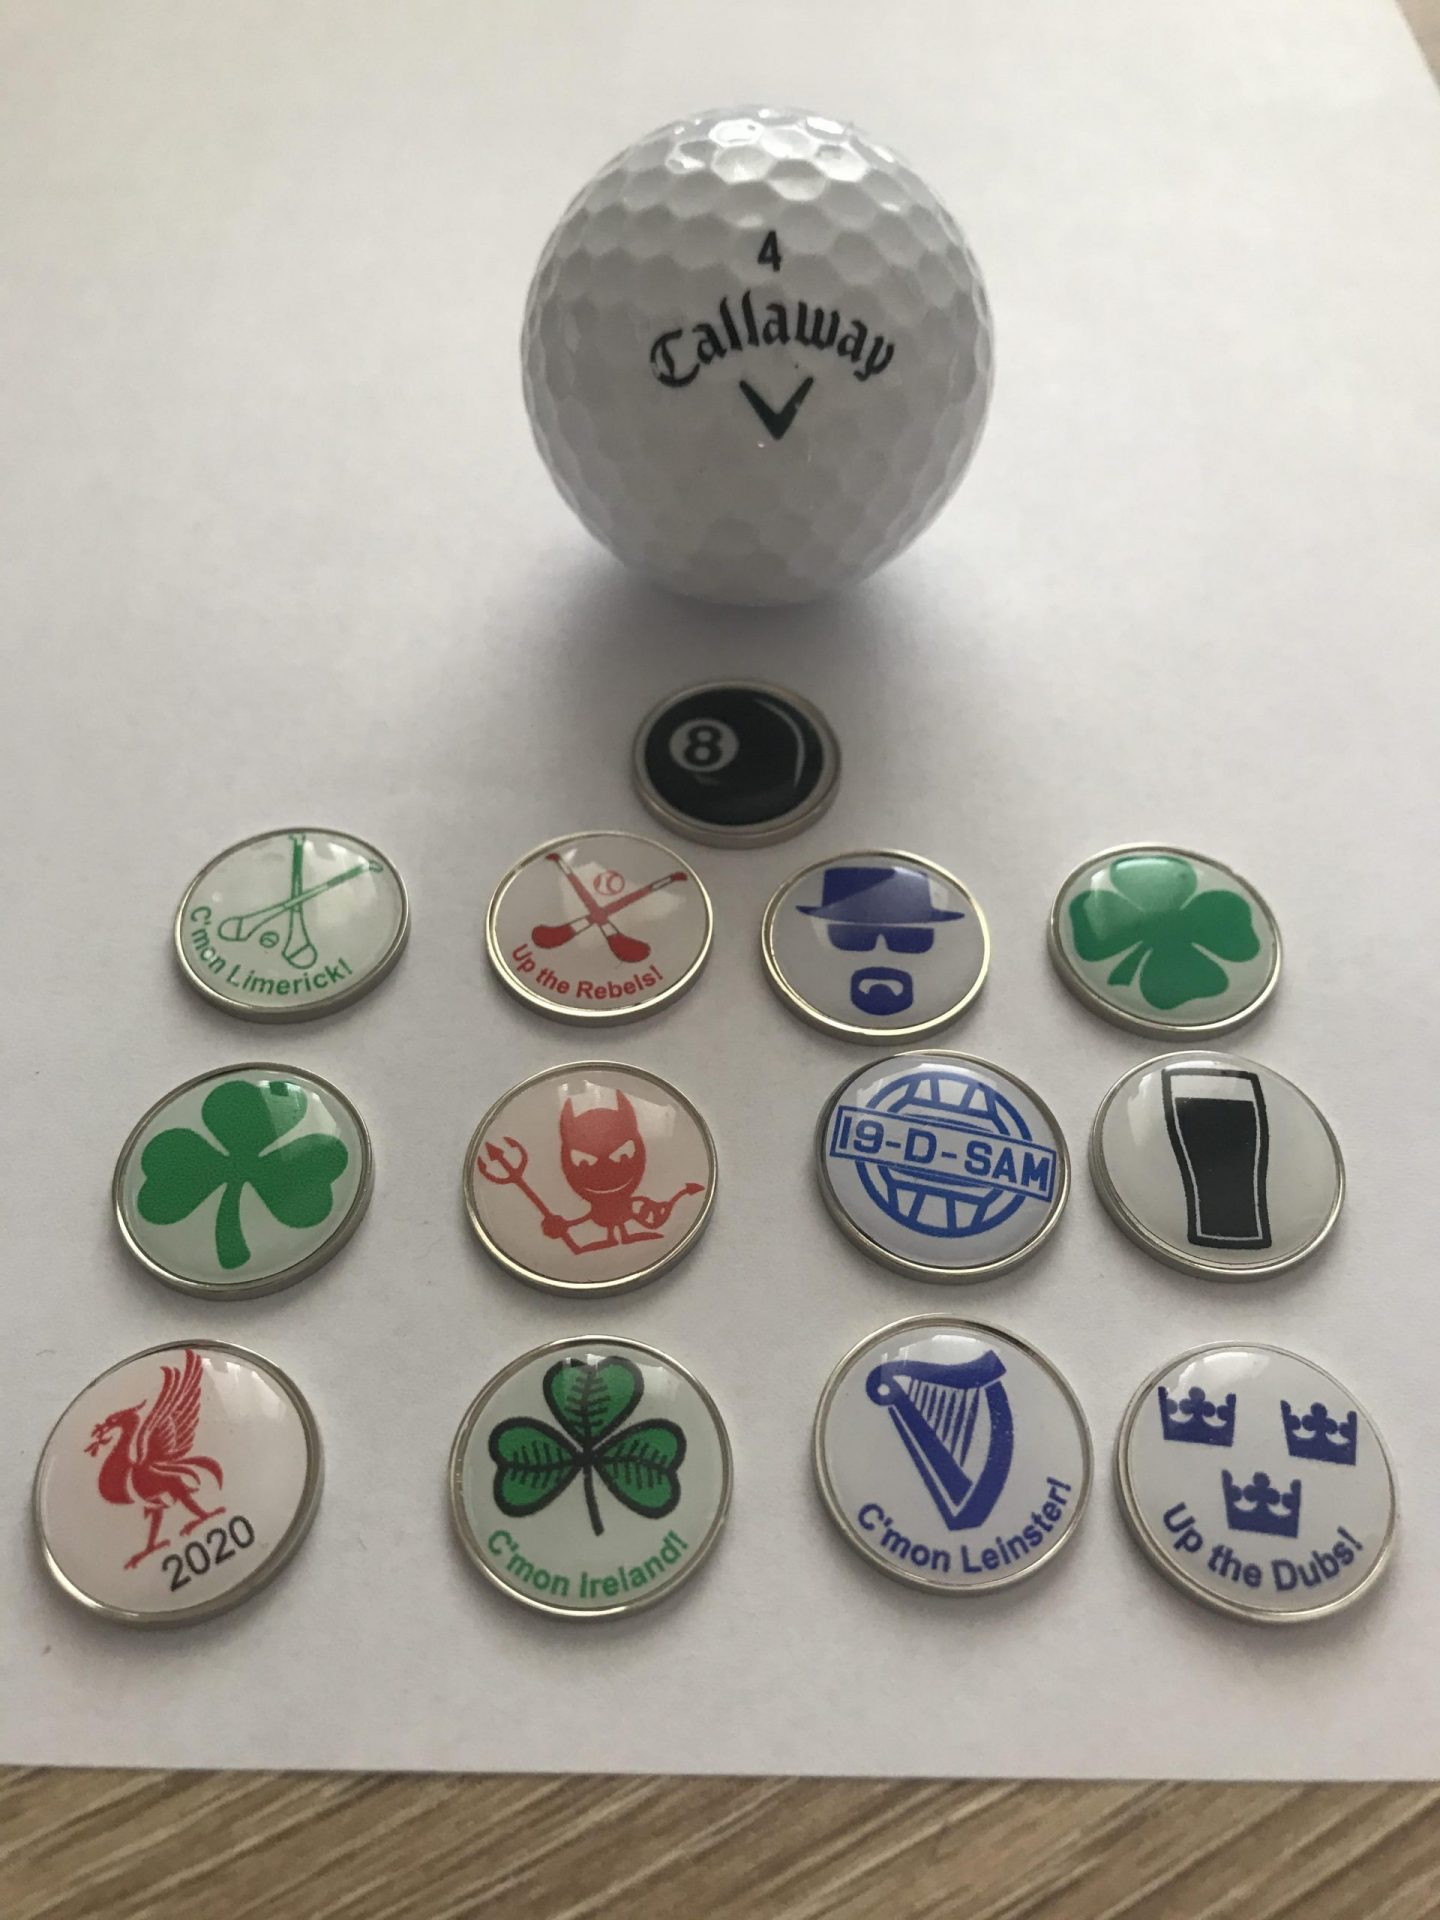 Great Personalised Golf Ball Markers of the decade Check it out now!